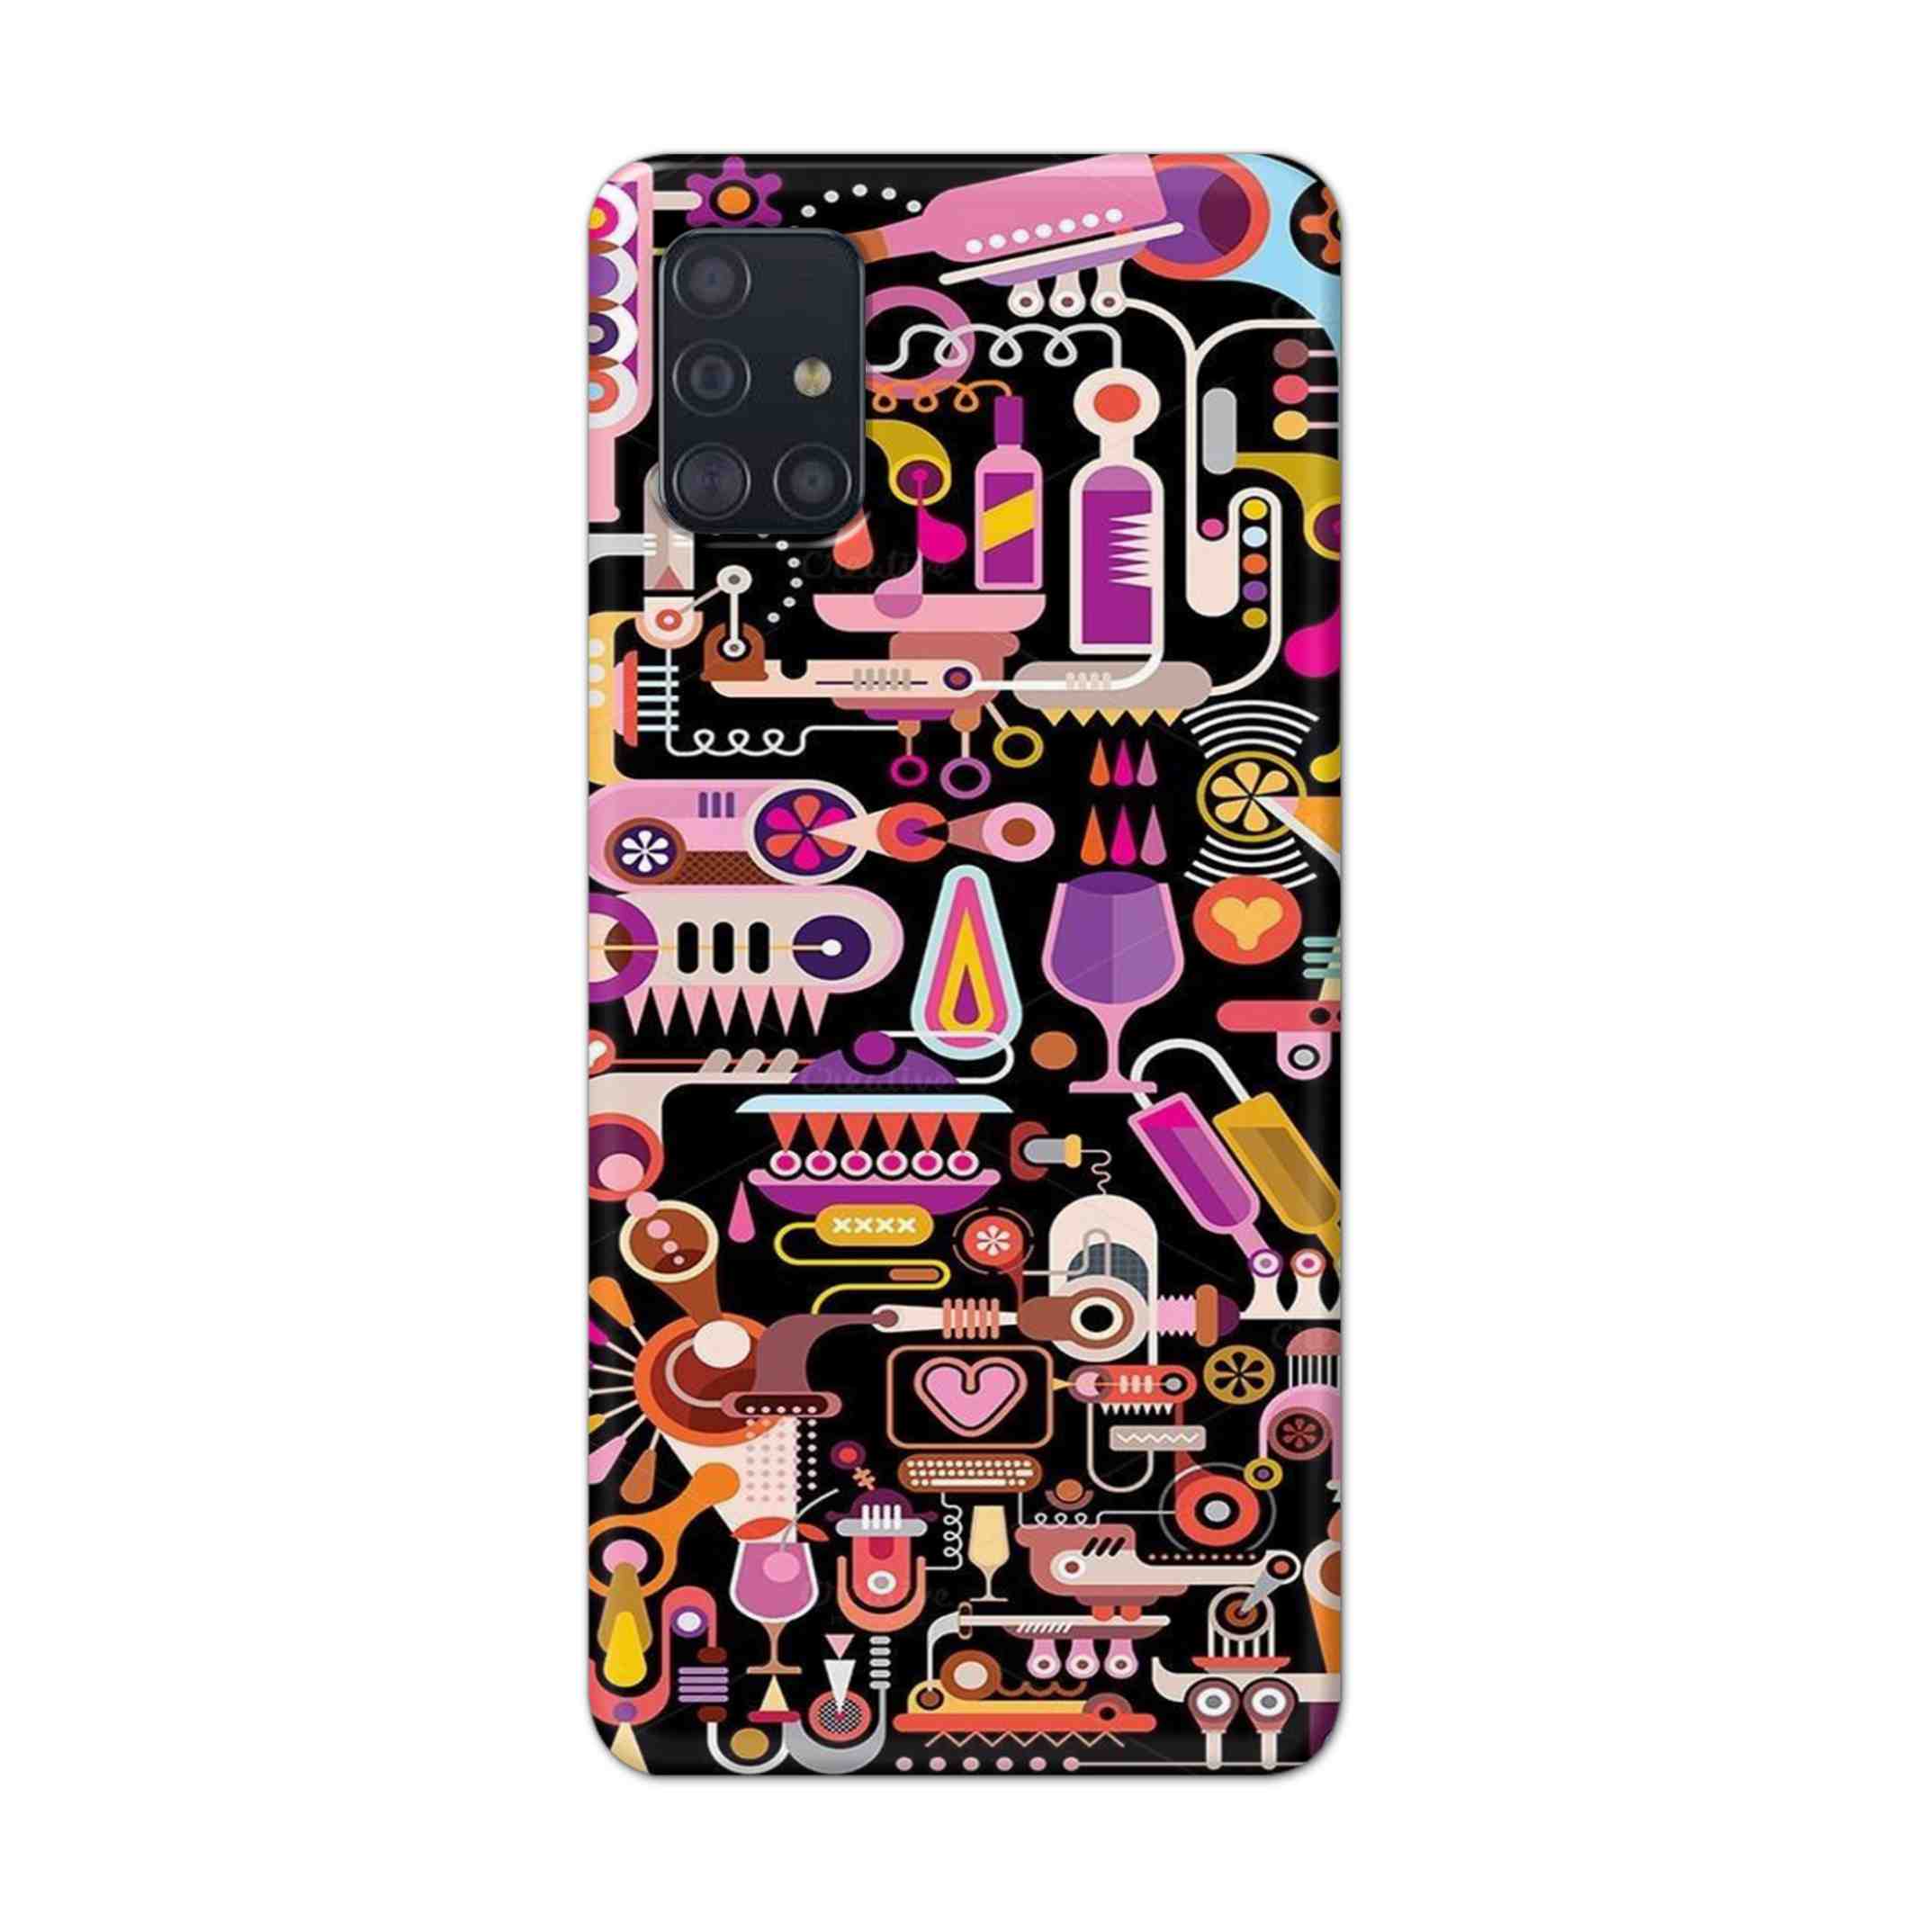 Buy Lab Art Hard Back Mobile Phone Case Cover For Samsung Galaxy M31s Online